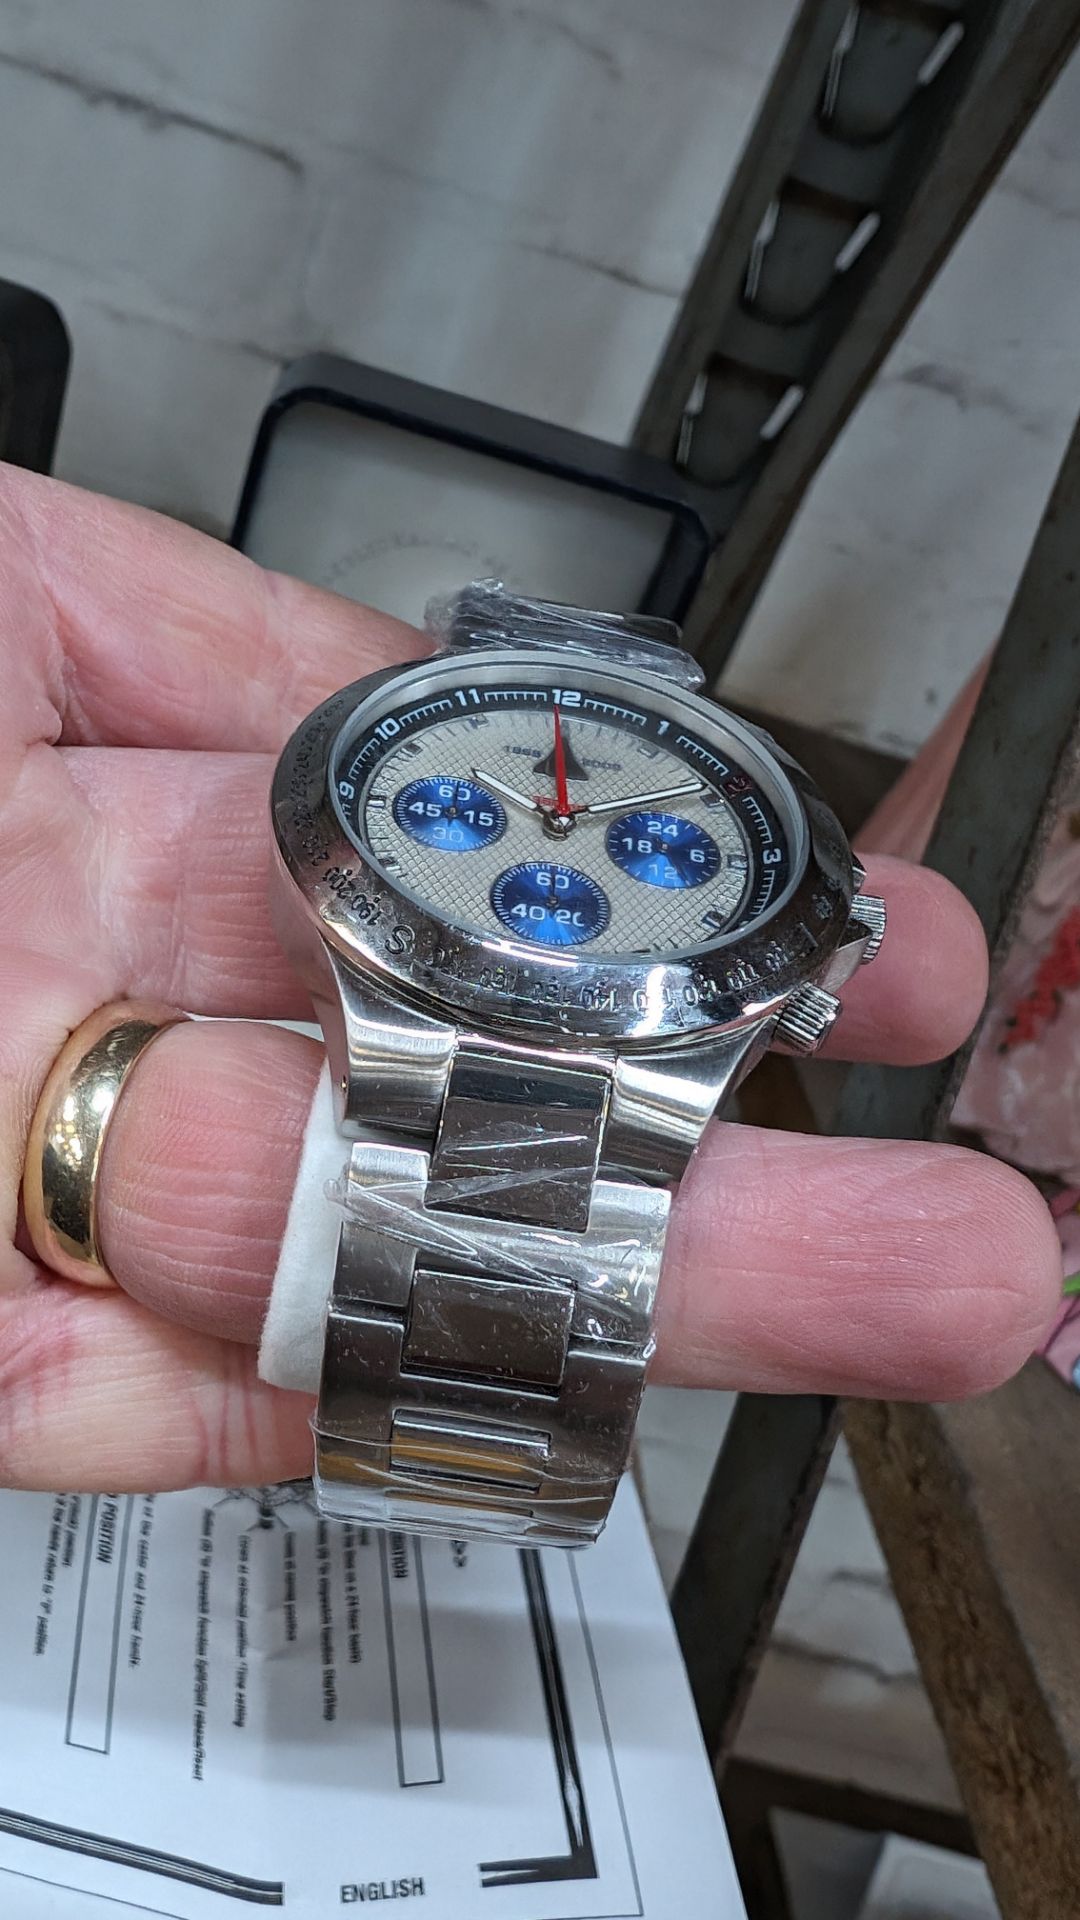 40th anniversary supersonic flight chronograph watch - Image 7 of 11